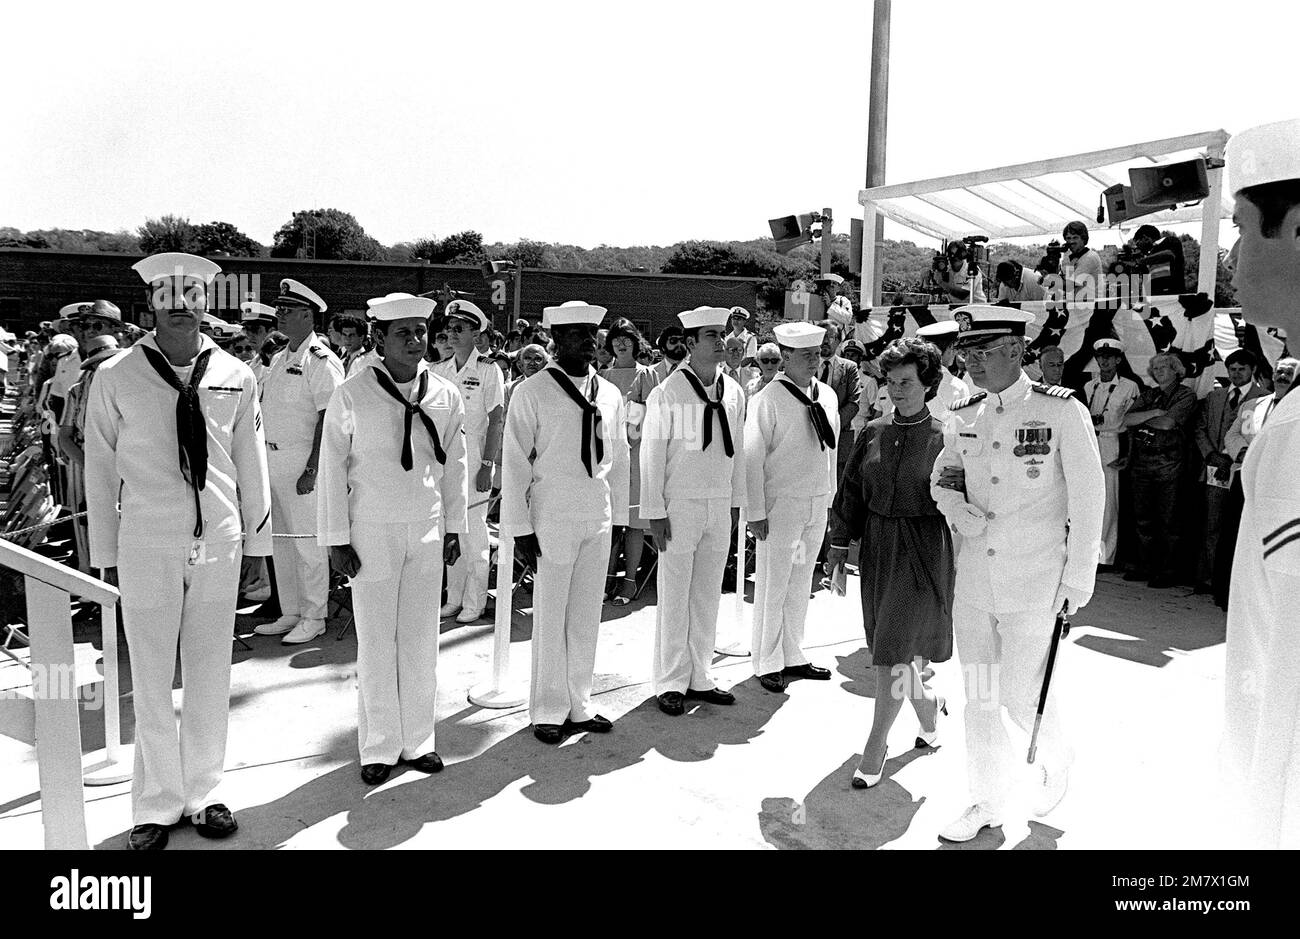 Representative Marjorie S. Holt, Republican - Maryland, principal speaker, is escorted to her seat prior to the commissioning ceremony for the nuclear-powered attack submarine USS BALTIMORE (SSN 704). Base: Naval Submarine Base, Groton State: Connecticut (CT) Country: United States Of America (USA) Stock Photo